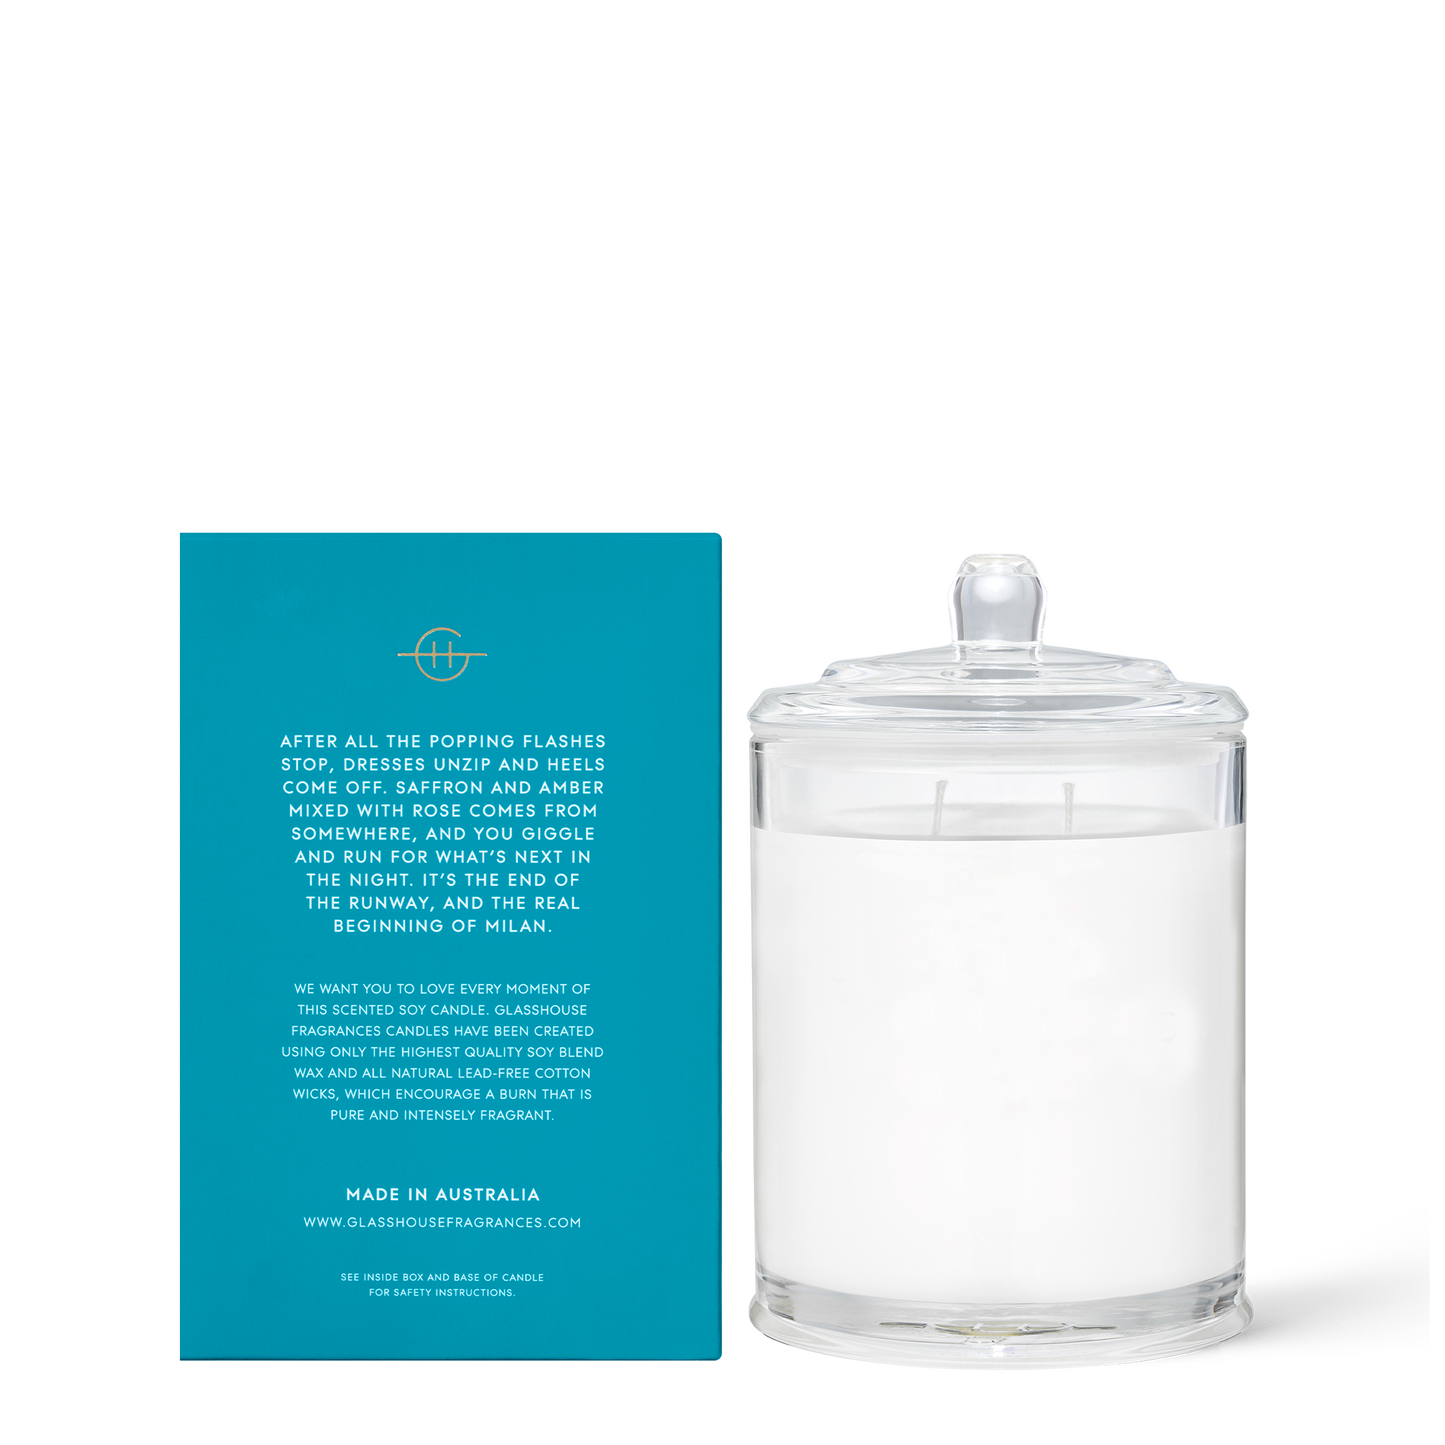 Midnight In Milan 380g Candle Saffron & Rose  A transcendent everyday luxury, it creates instant ambience. Sensual rose, buttery saffron and something you can’t put your finger on - striking moss.